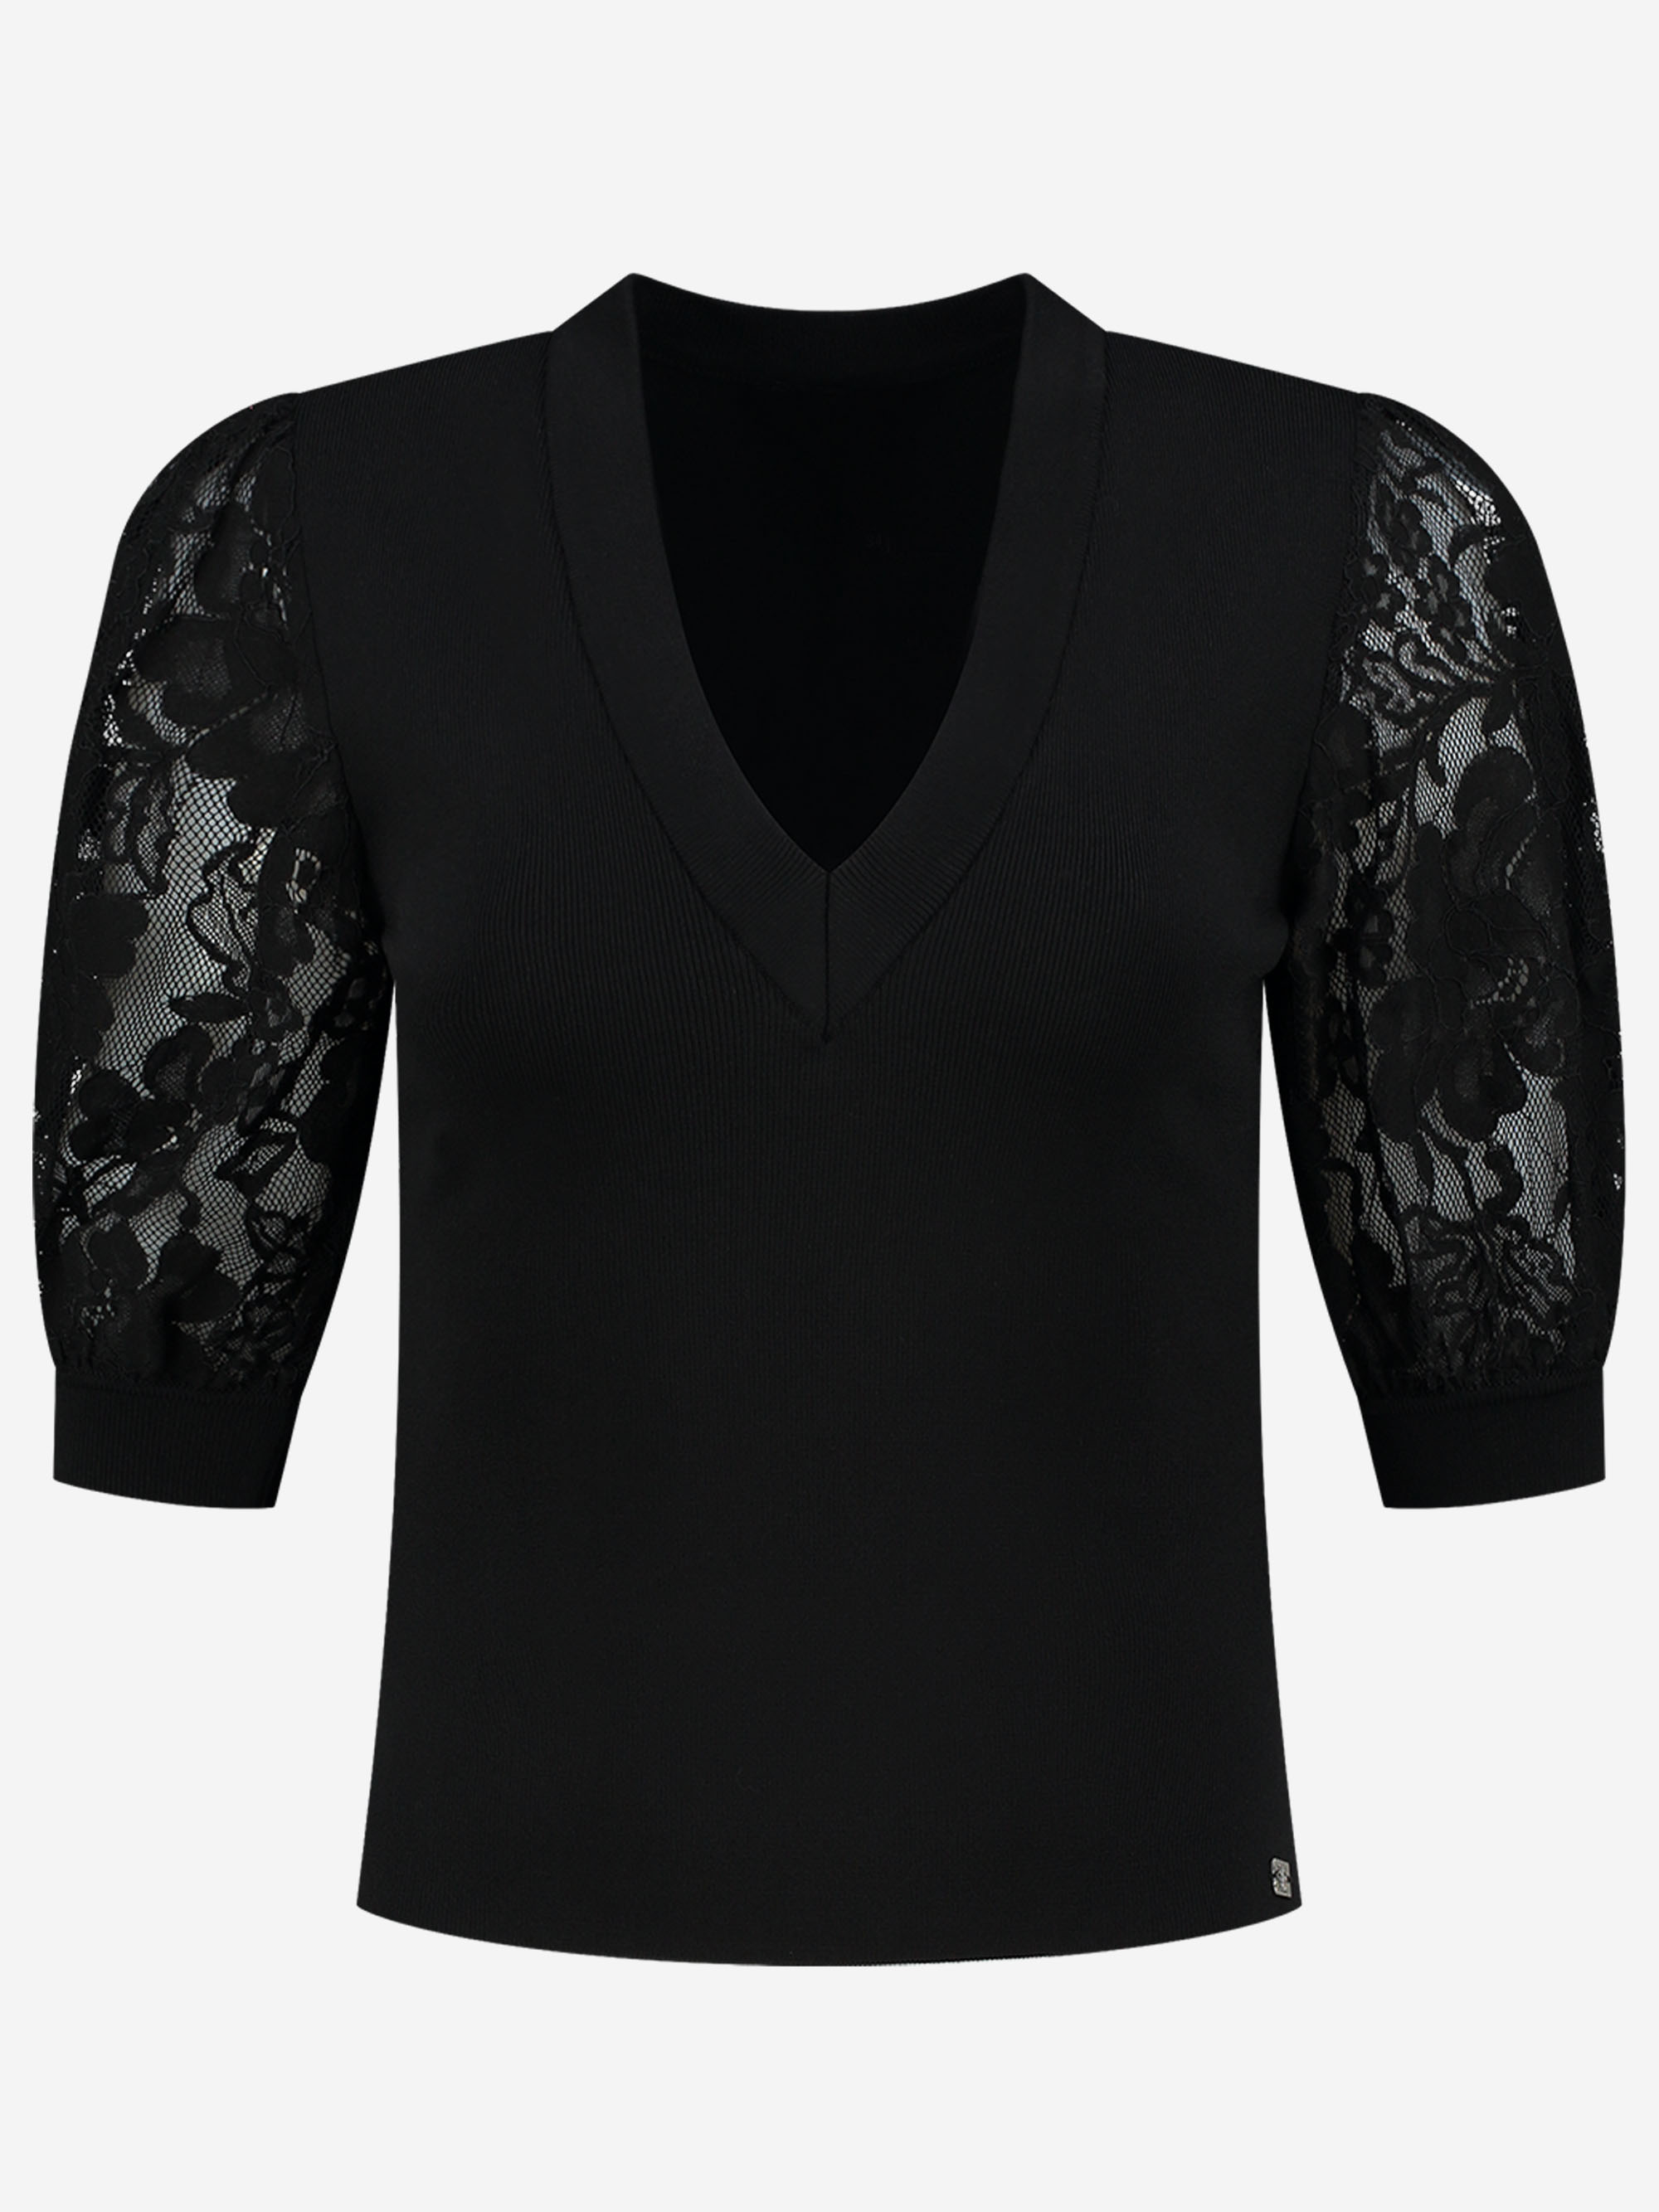  V-neckline top with lace sleeves